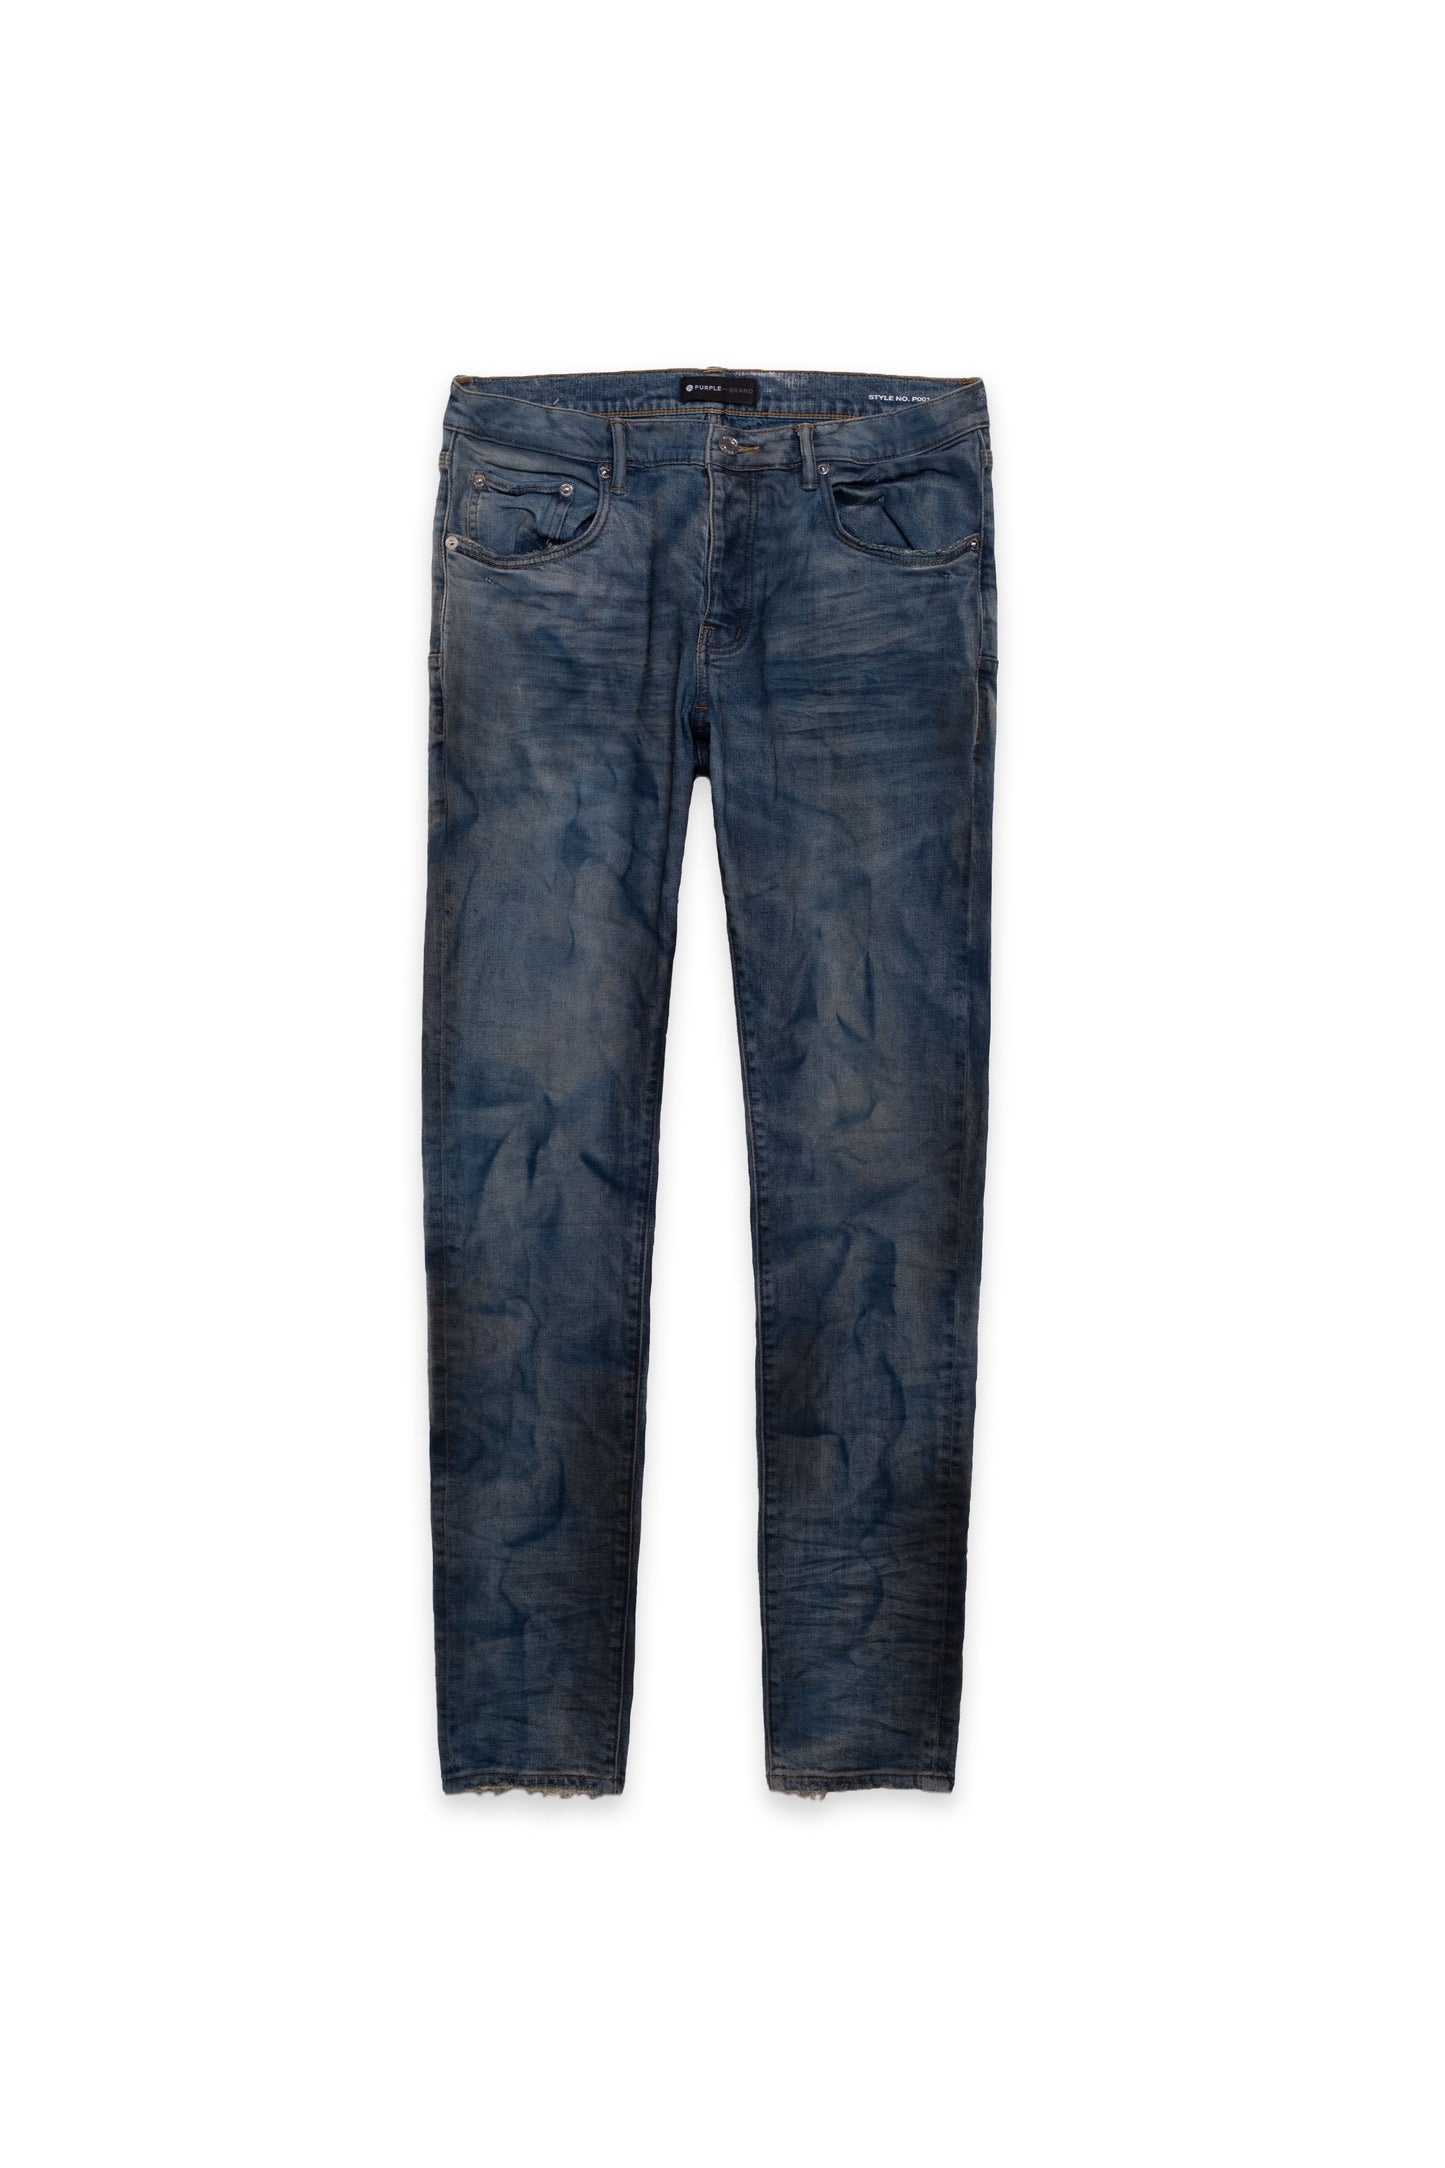 PURPLE BRAND - Men's Denim Jean - Low Rise Skinny - Style No. P001 - French Blue Indigo Dirty Resin - Front